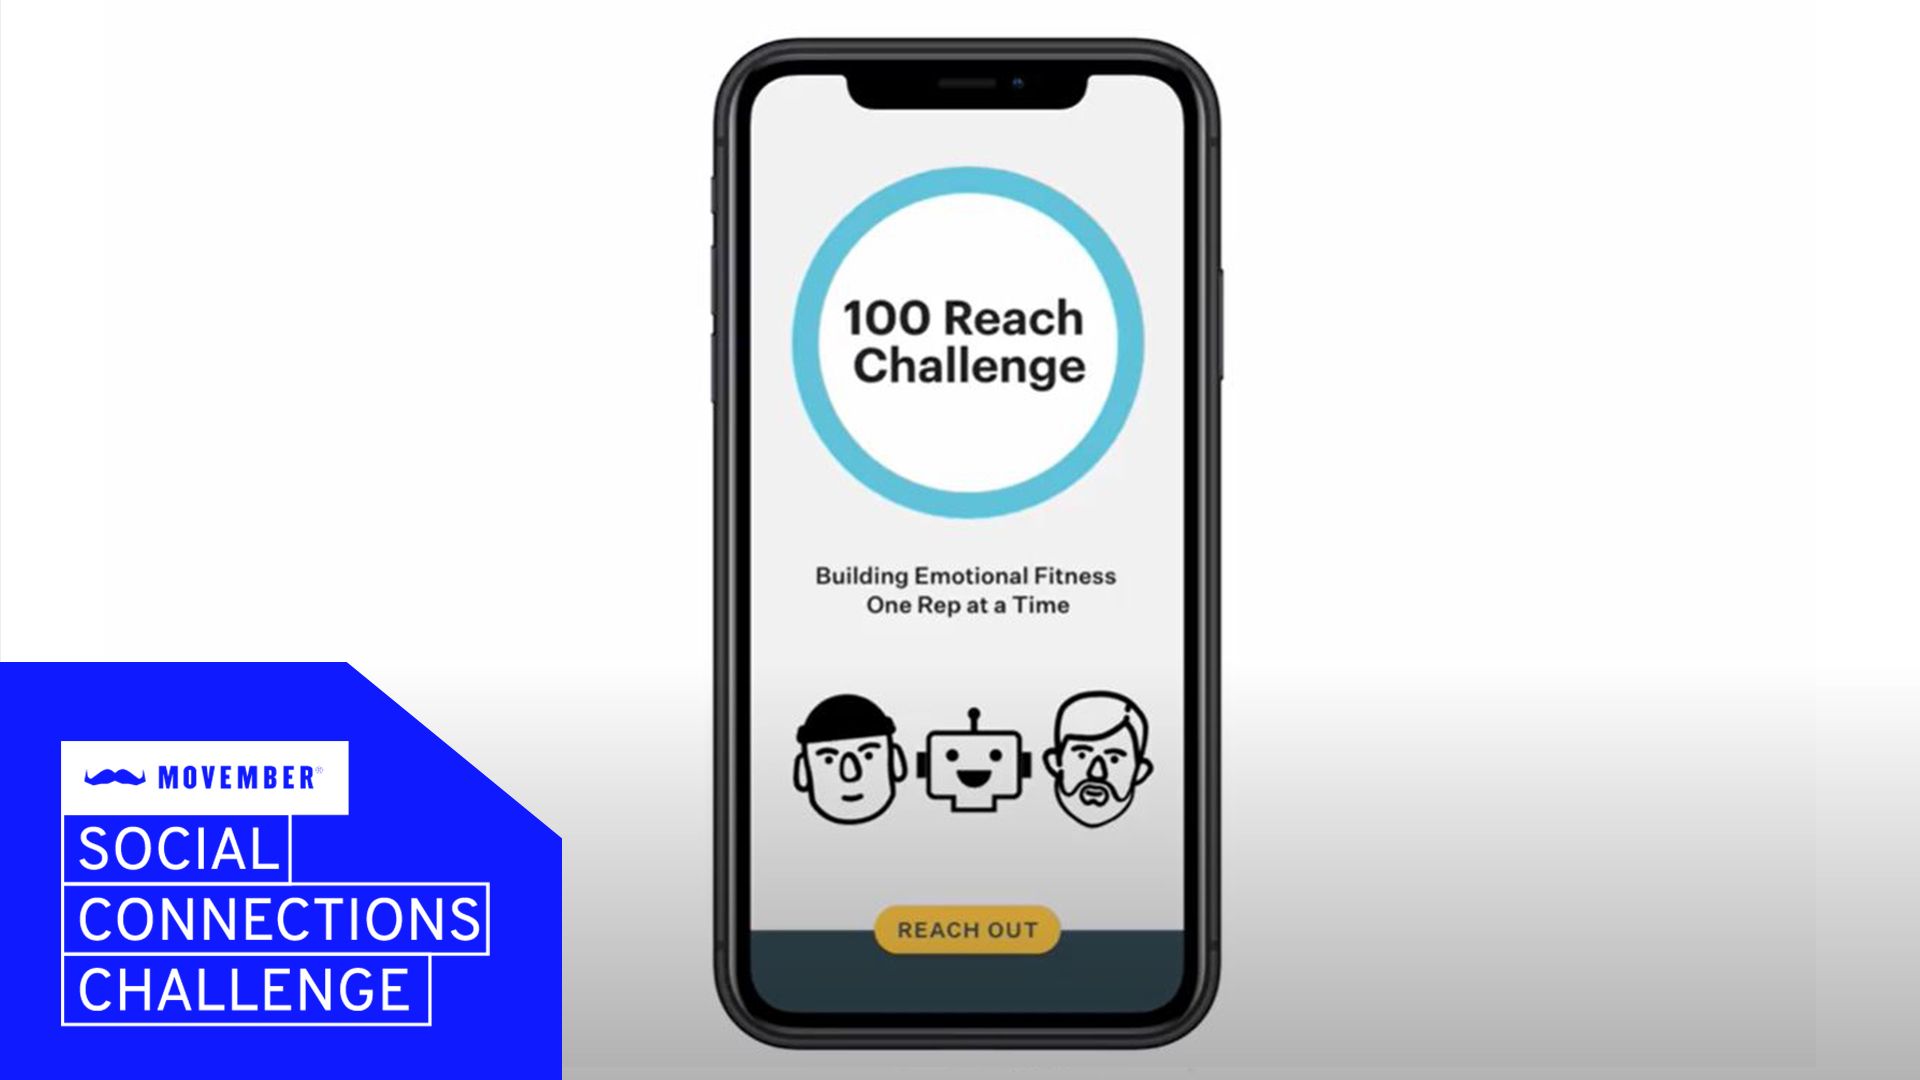 A mock-up of the 100 Reach Challenge on an iPhone screen